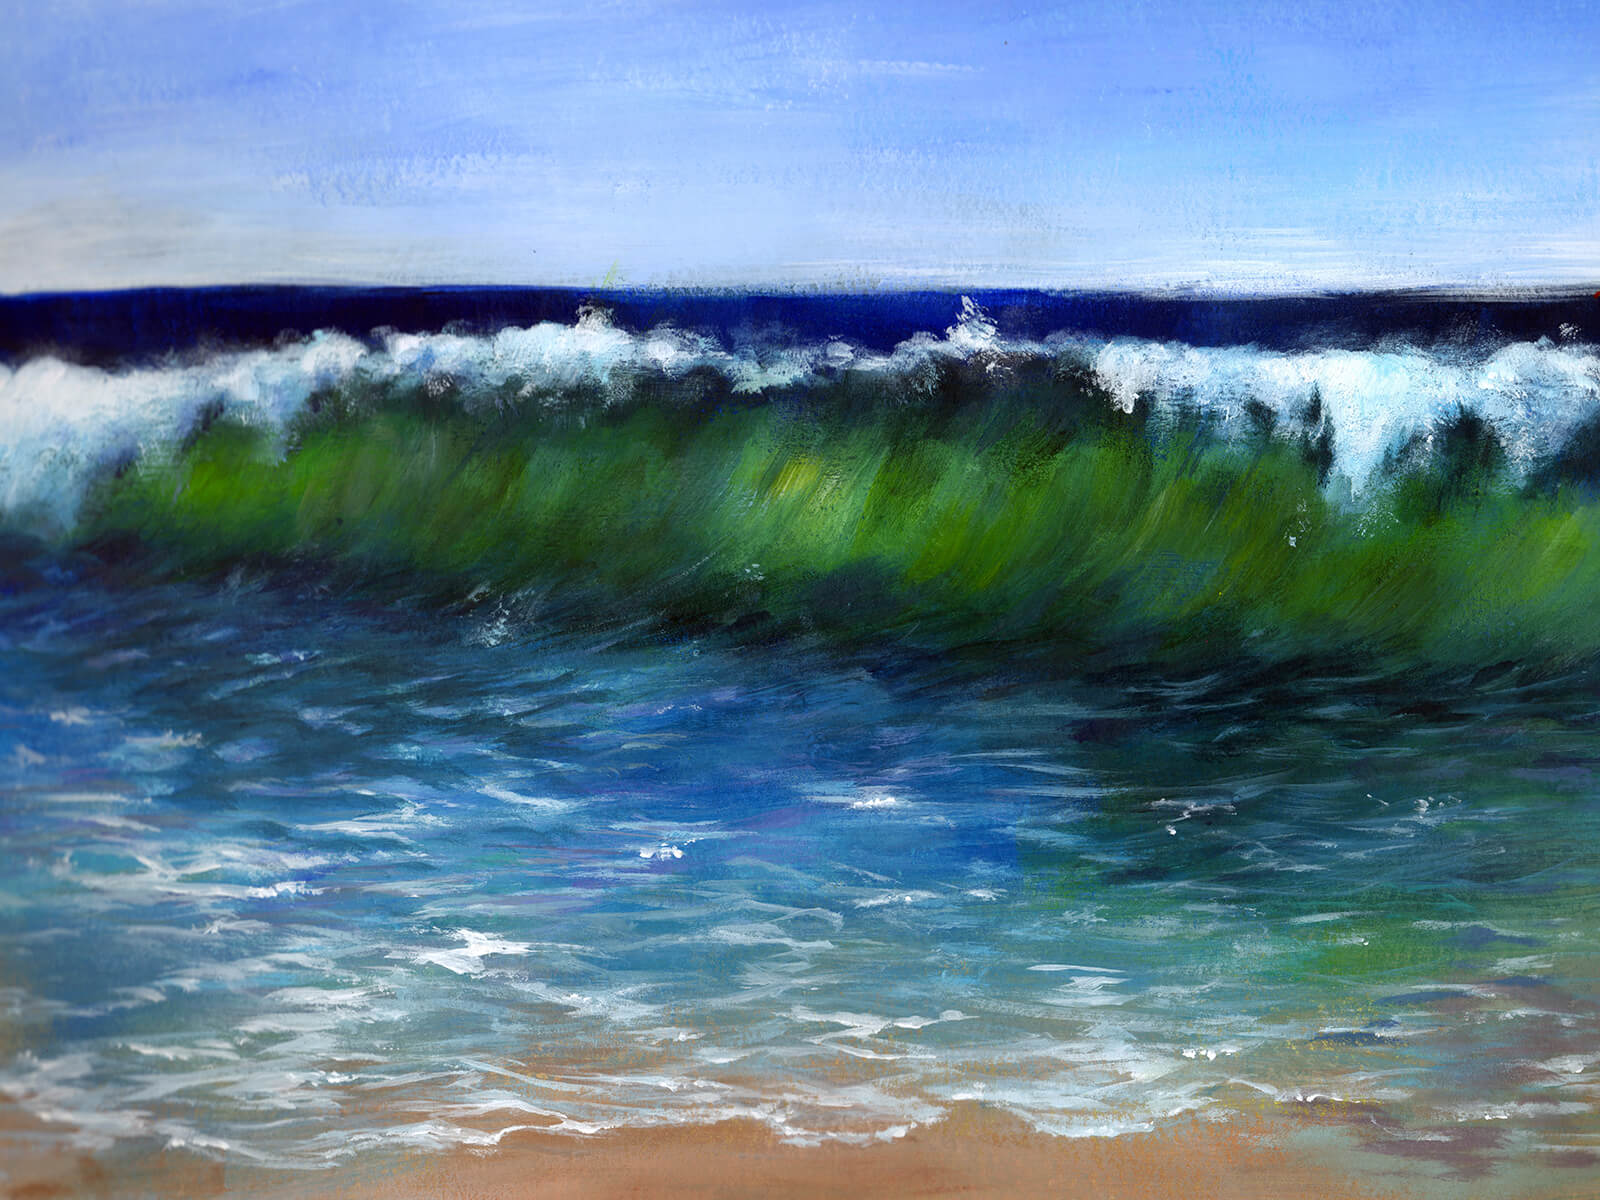 A greenish wave crests toward the viewer near a sandy shore. Blue skies and a deeply blue ocean are seen behind.